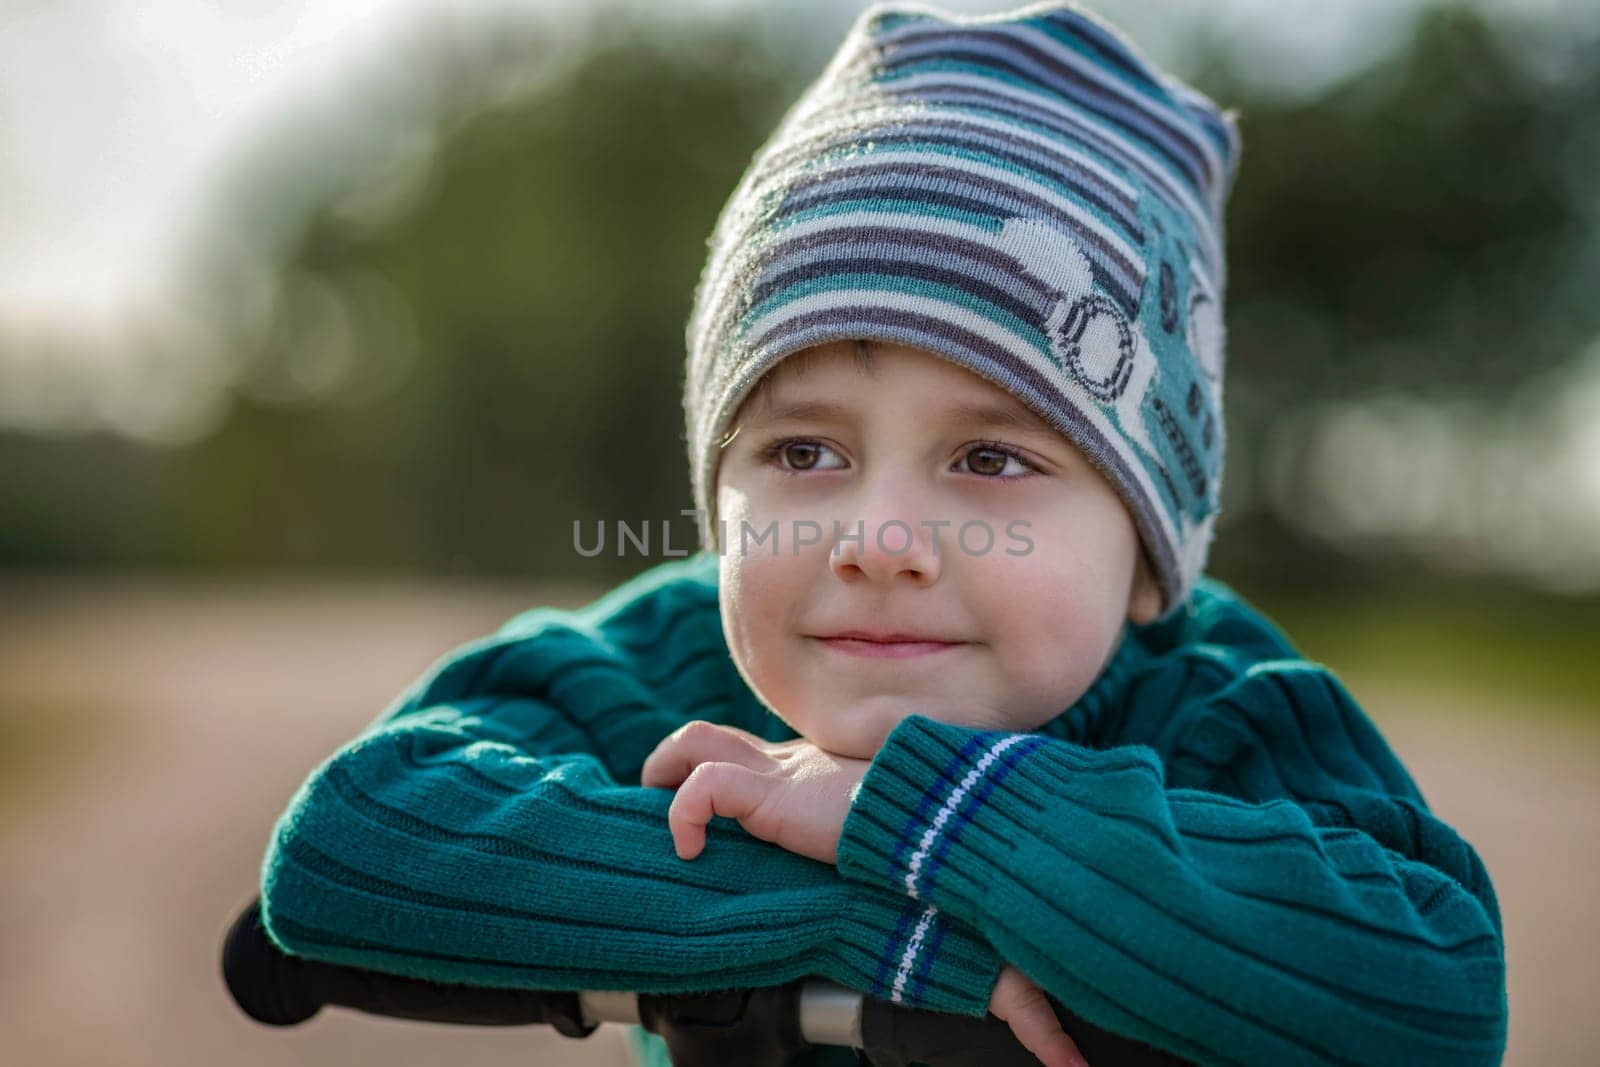 A photo of a beautiful boy. Close-up portrait. Natural, not staged photography. Children